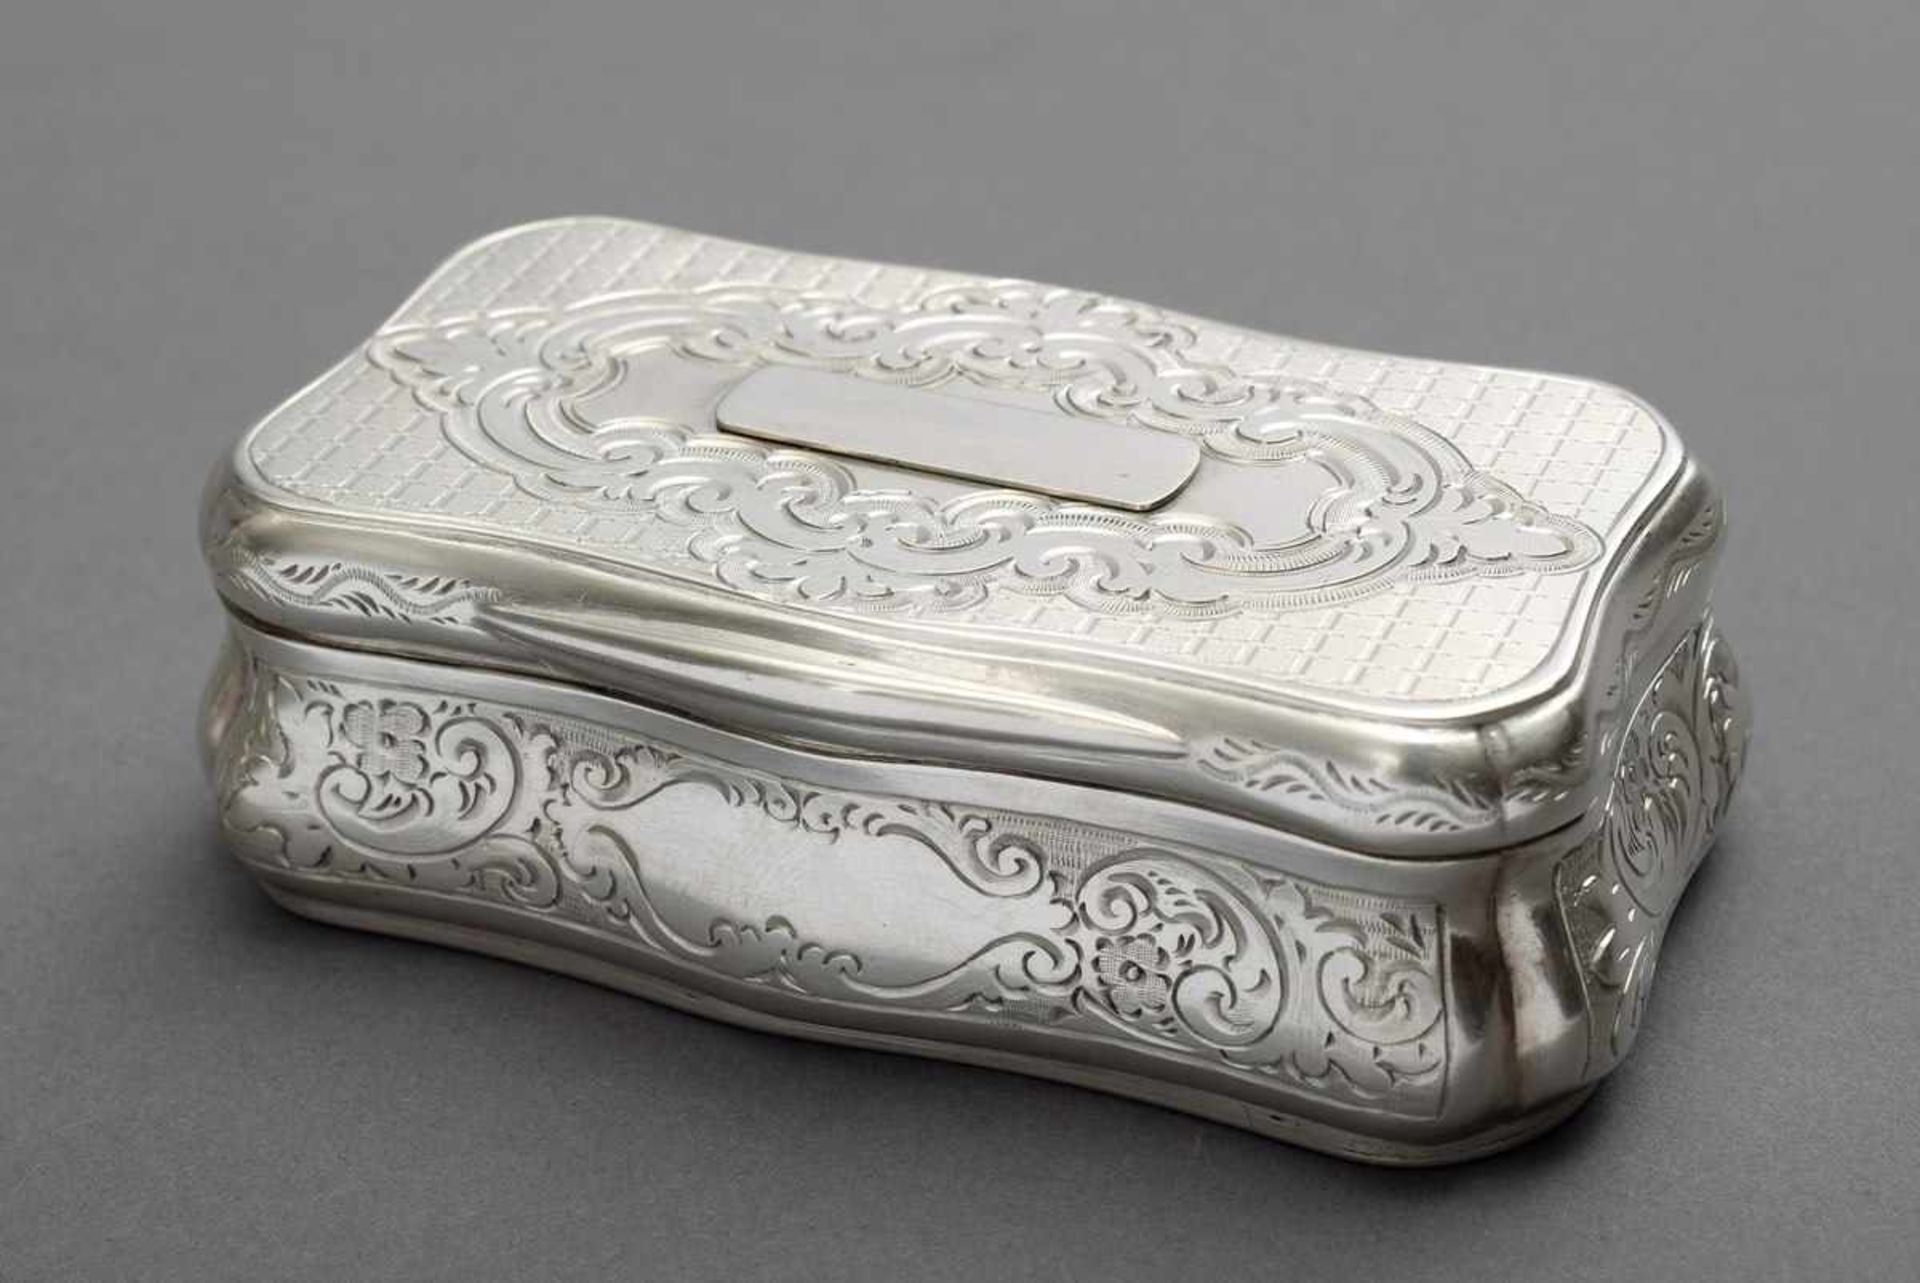 Austrian tabatiere with floral engraved corpus, on the bottom date engraving "den 3. Jan: 1868", MM: